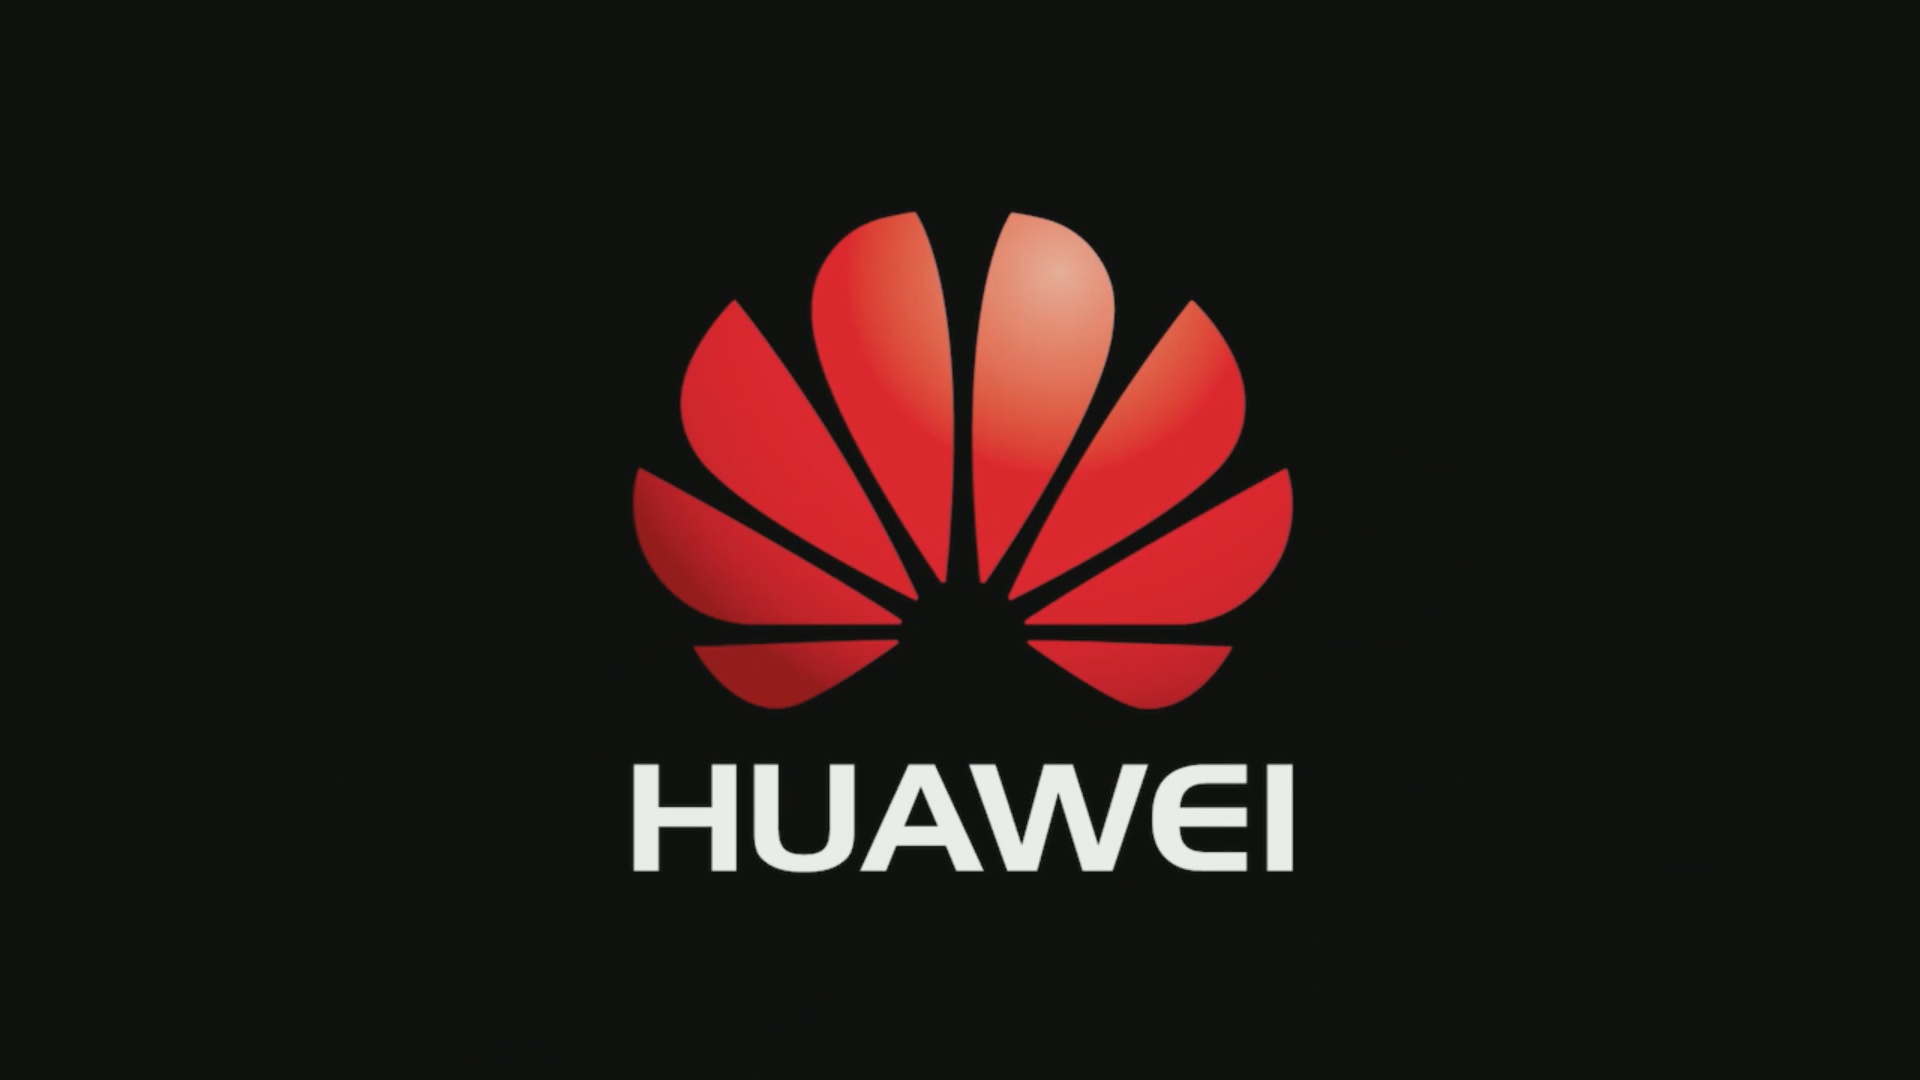 Fixed - Sound Not Works on Huawei M886 Mercury